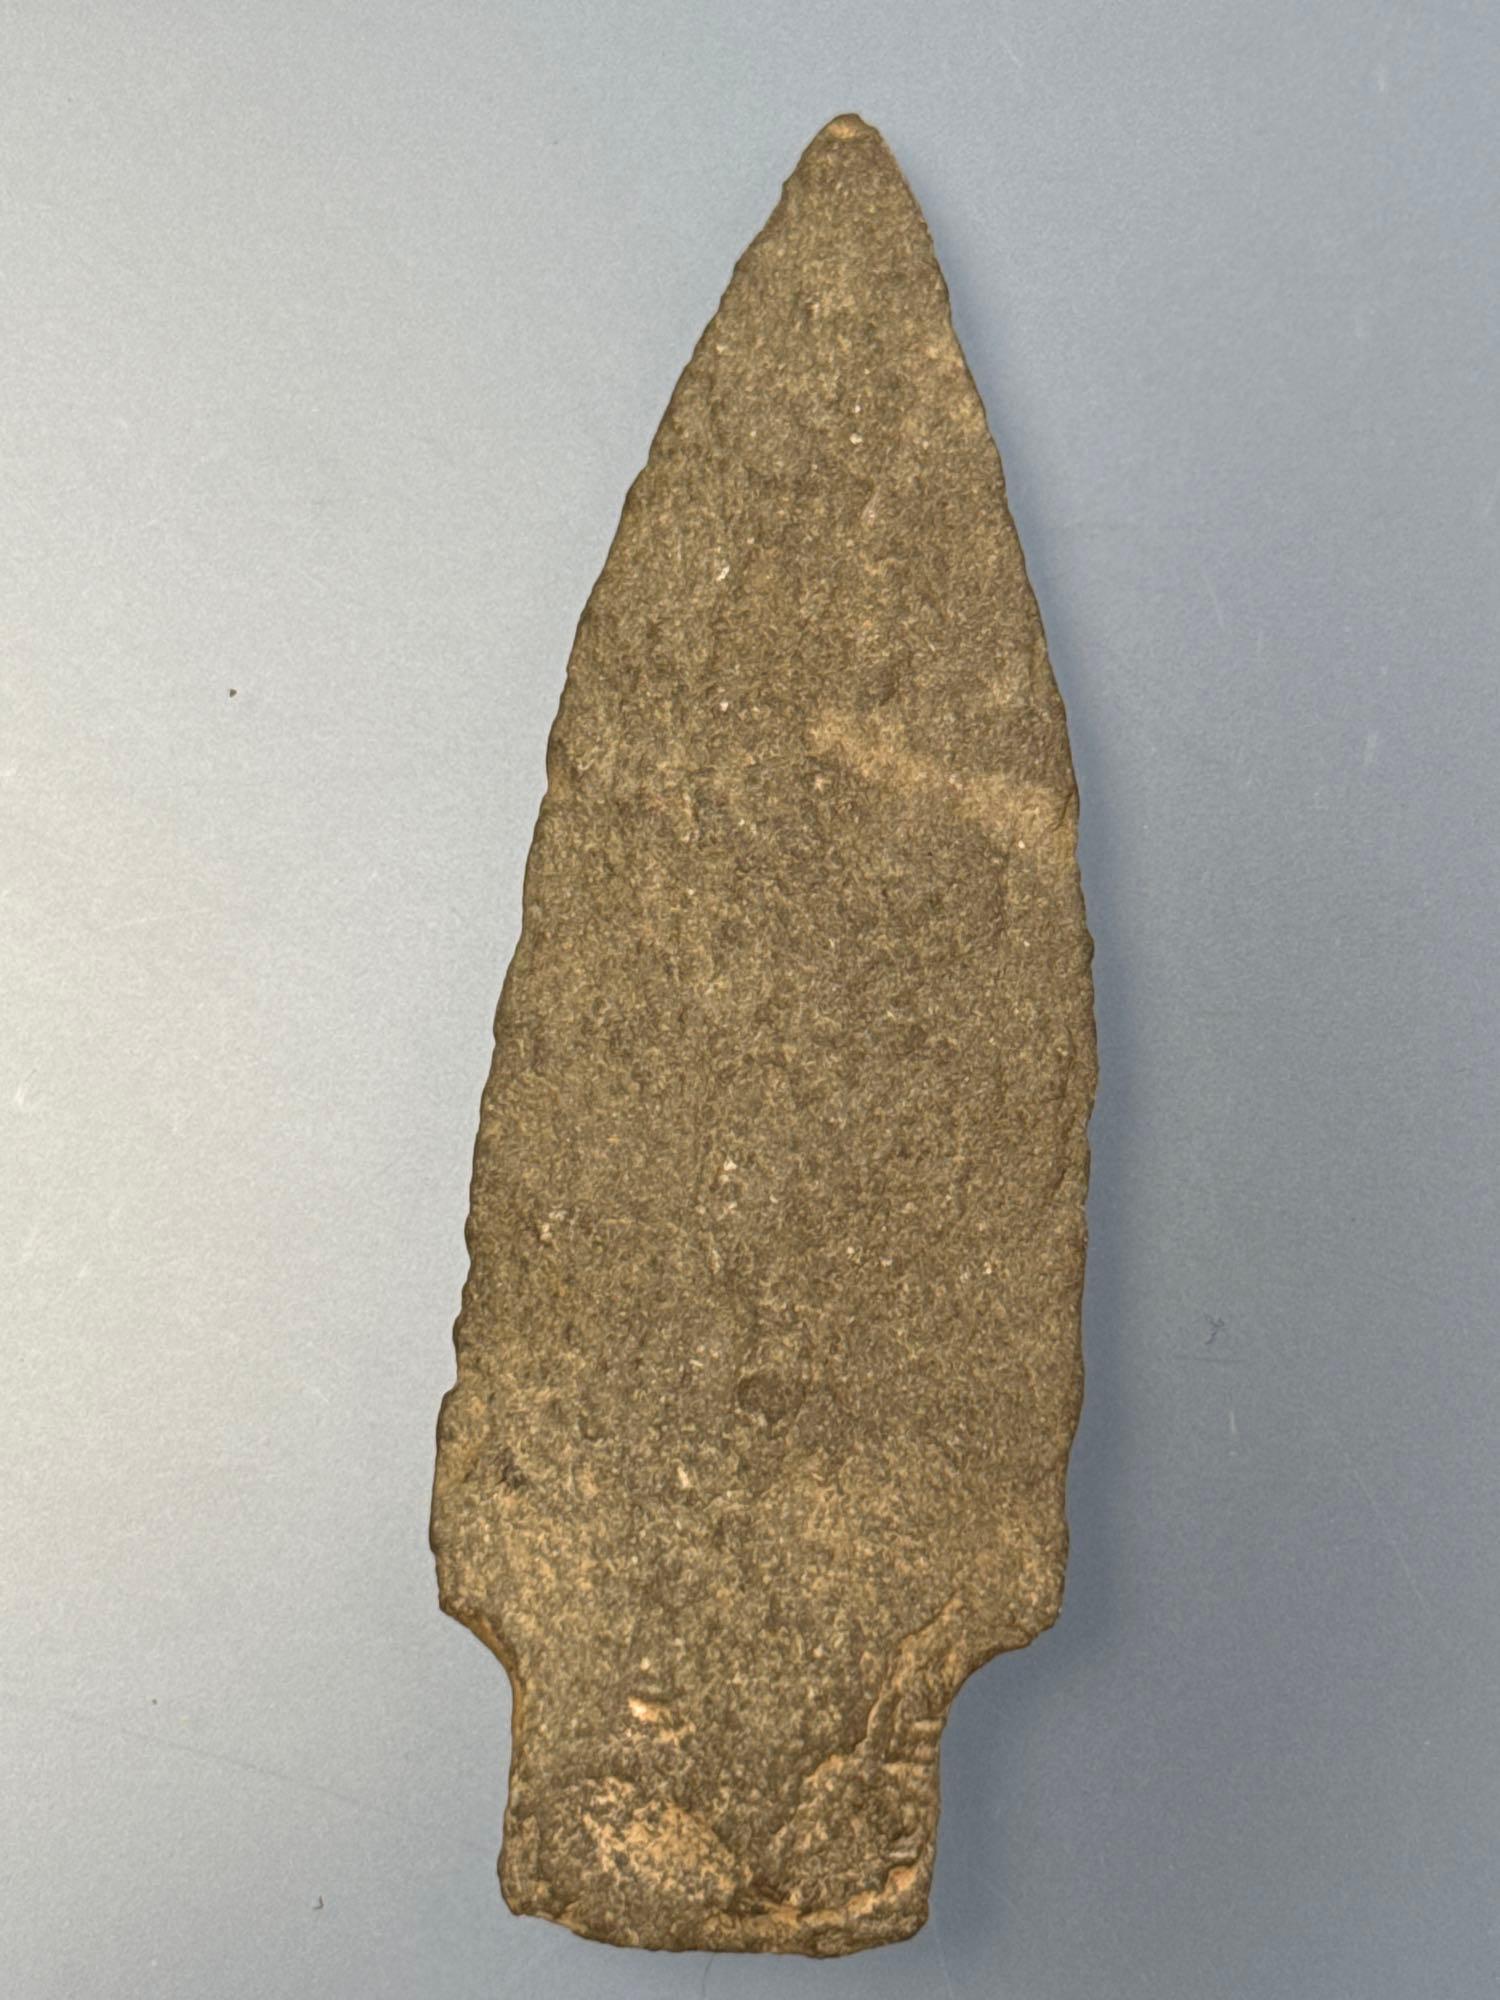 Classic 4" Bare Island Point, Found in Lancaster Co., PA, Nice Lower Susquehanna River Spear!